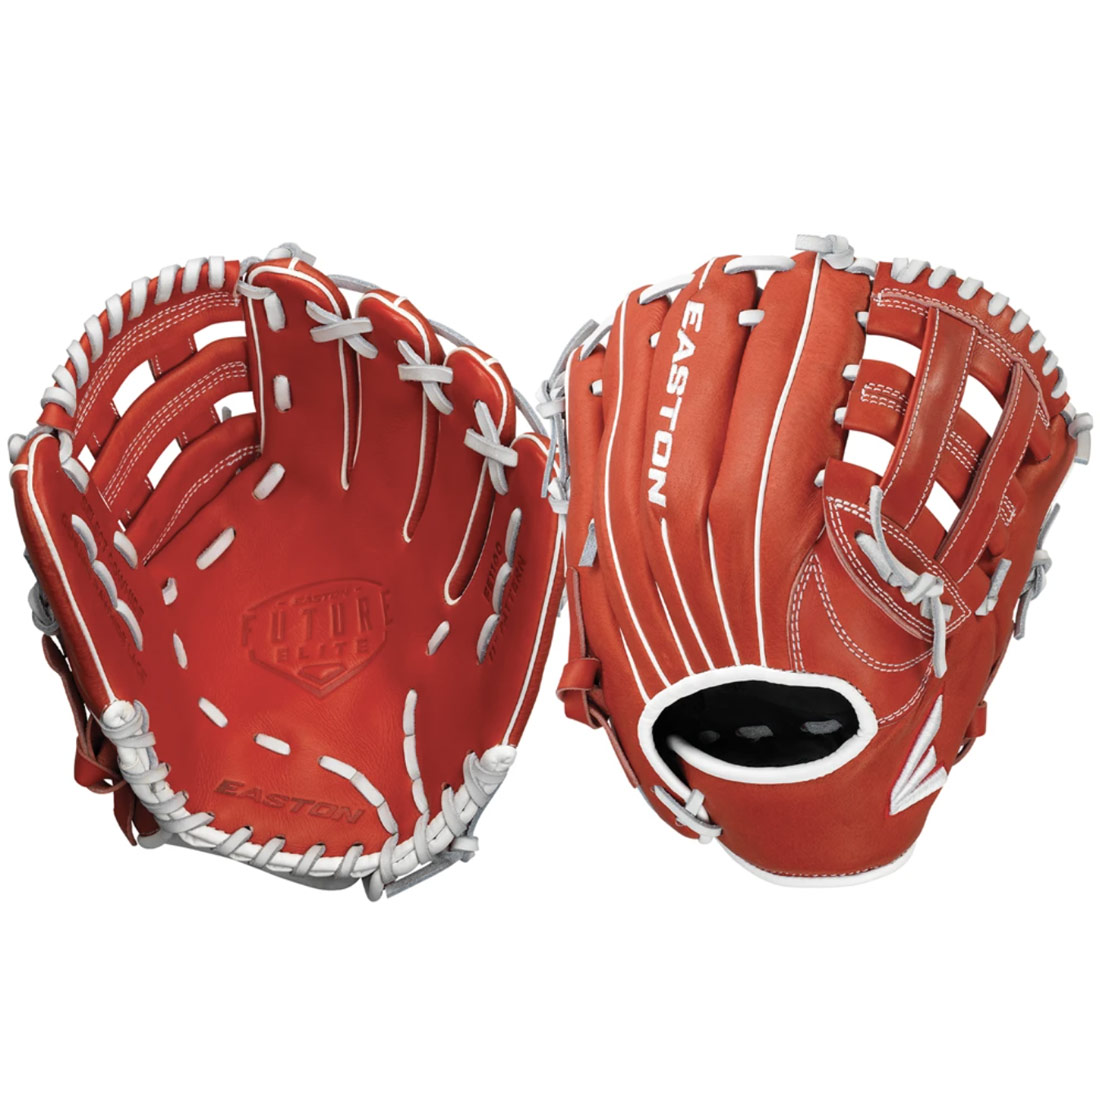 Lists @ $40 NEW Easton Scout Flex SC1100 11" Youth Utility Baseball Glove 